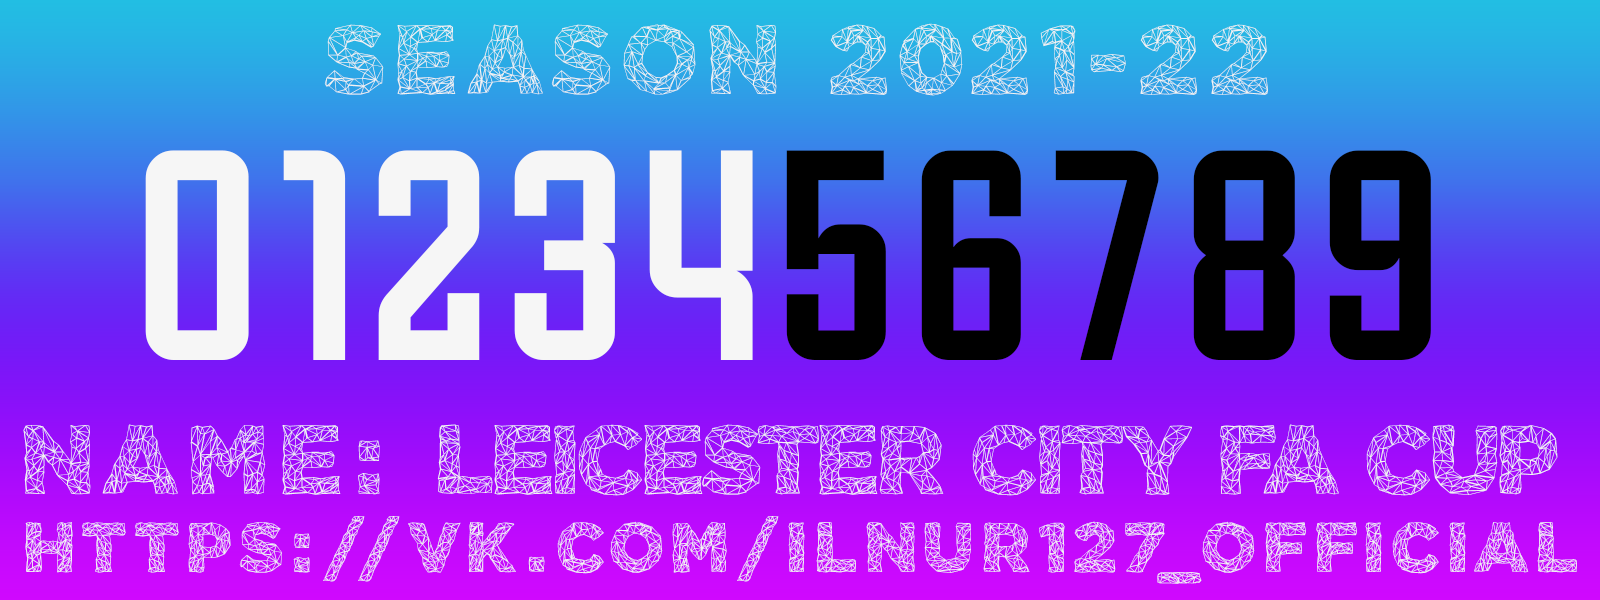 Leicester City FA Cup 2021-22 (kitnumbers).png